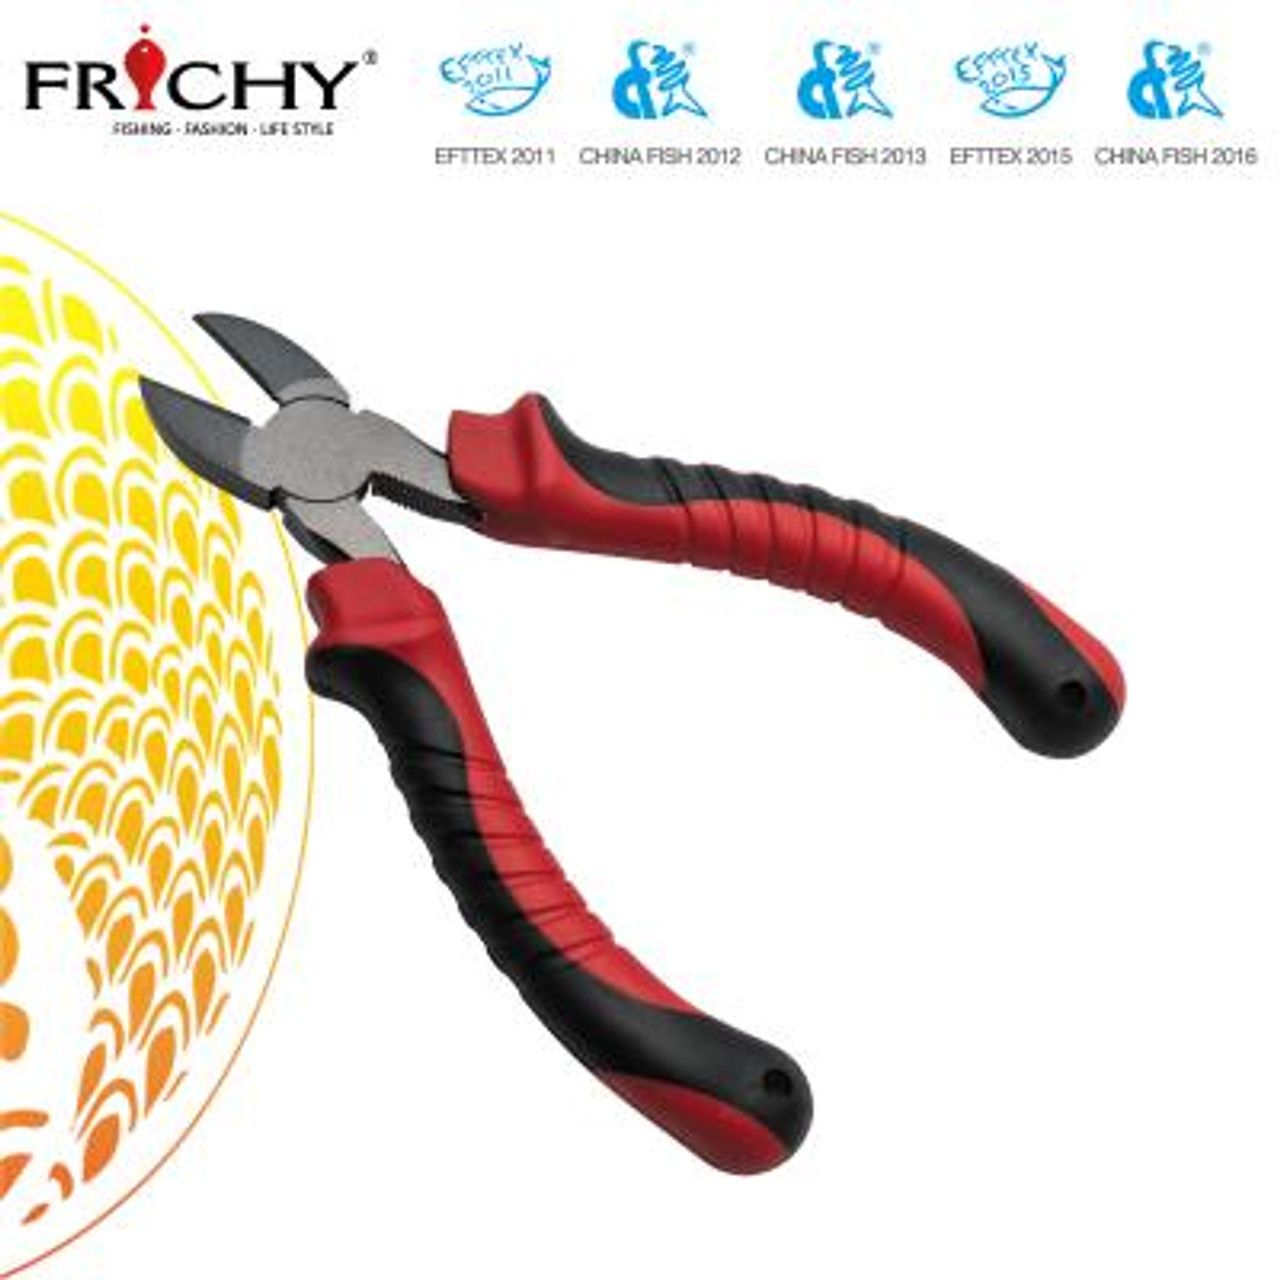 Frichy X42 Forged Steel High Carbon Wire Cutter